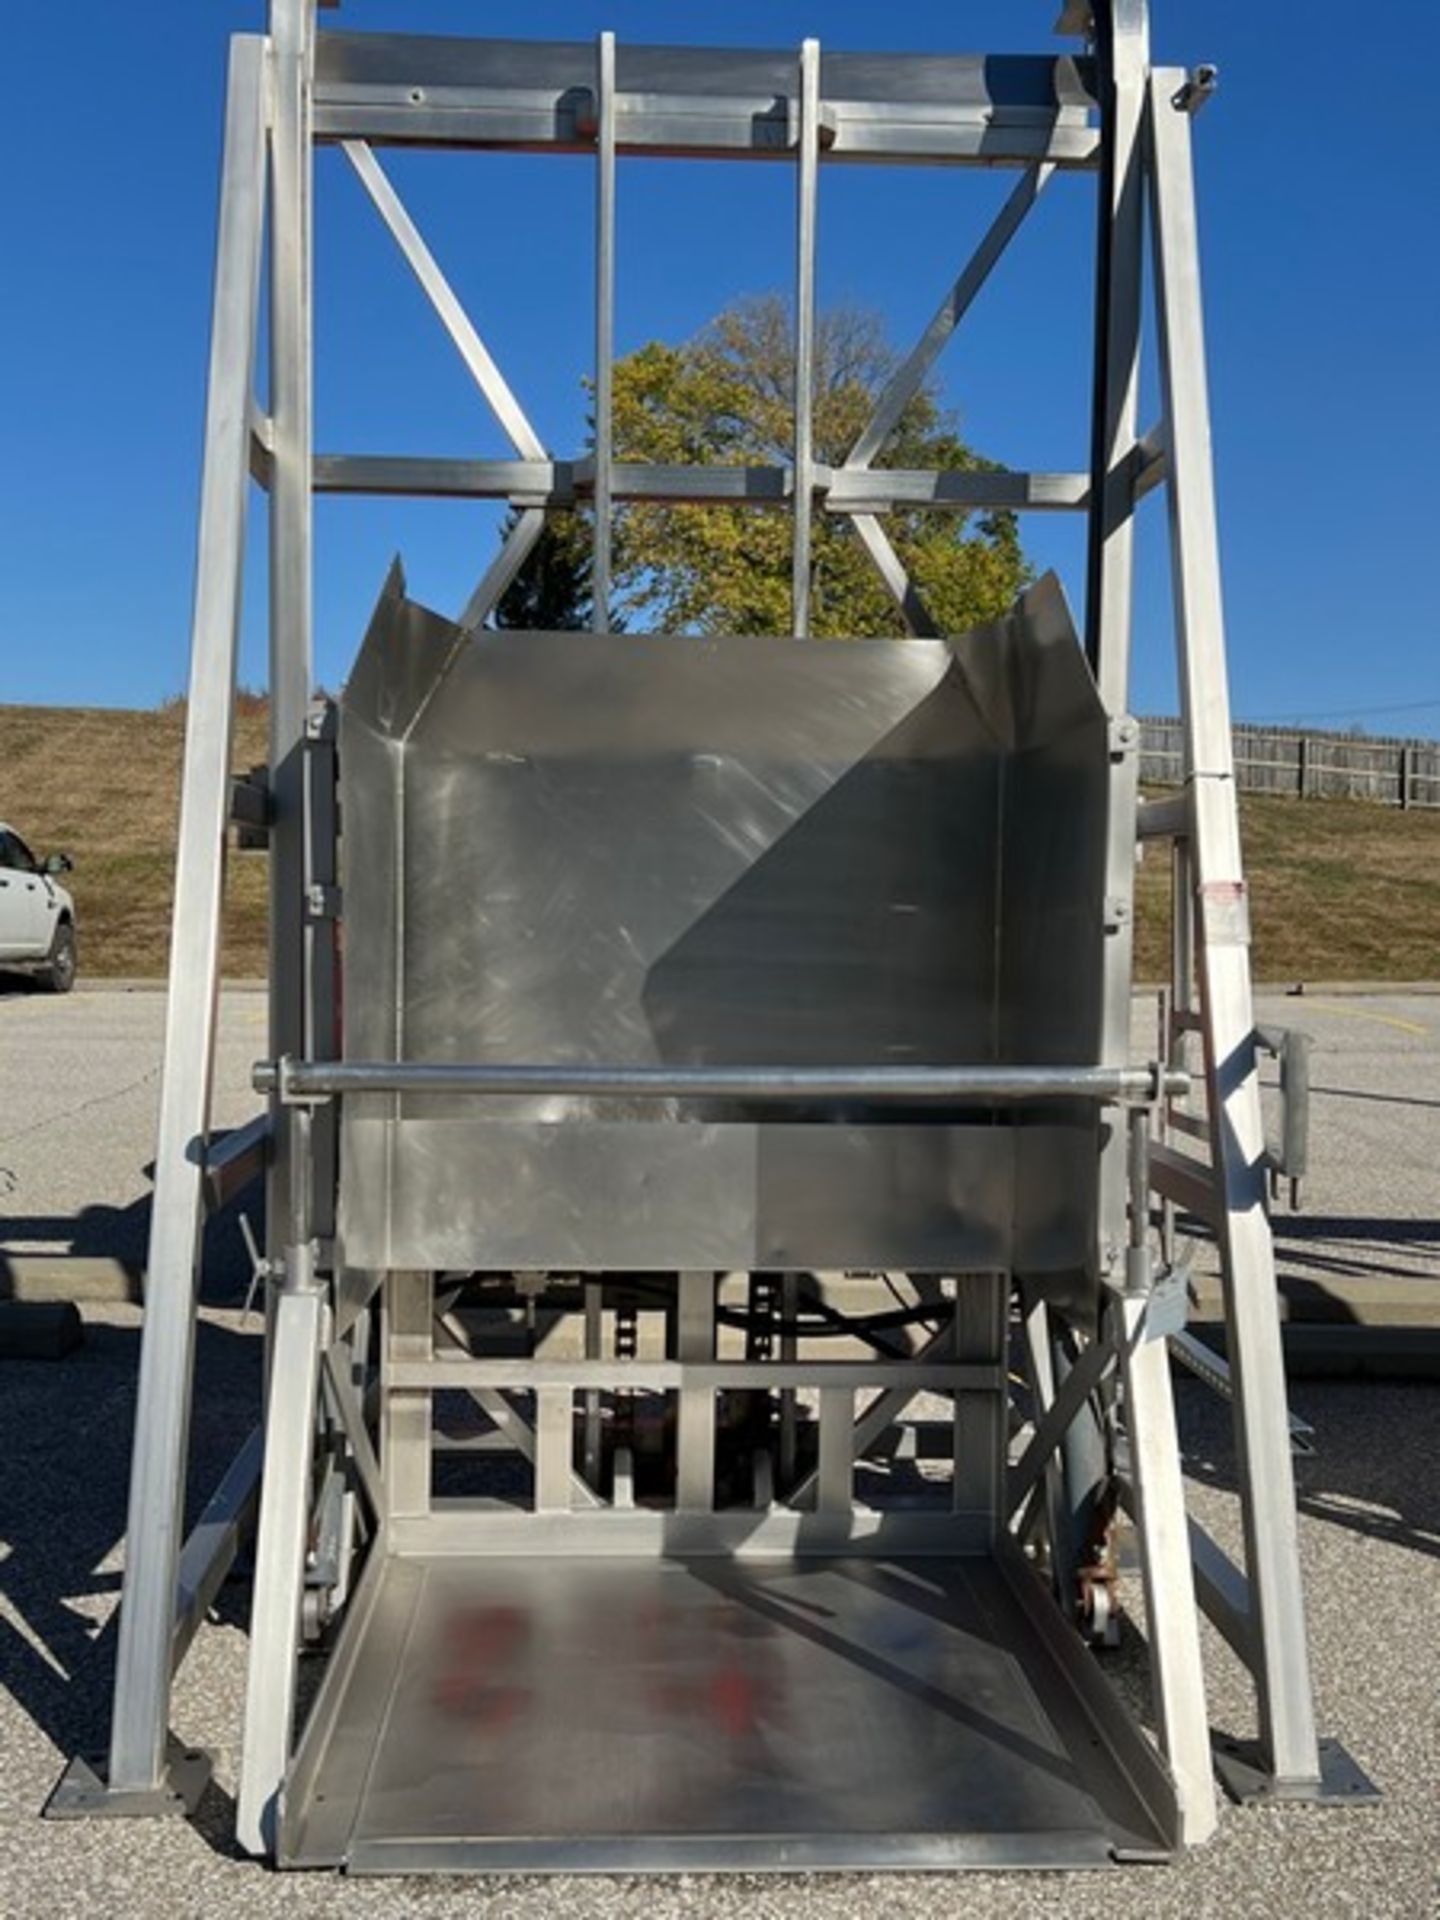 MTC 3,000 LB TOTE DUMP COLUMN, MODEL H-LEC, S/N 073600, APPROX. 132” DUMP HEIGHT, FOR APPROX . 52” L - Image 2 of 6